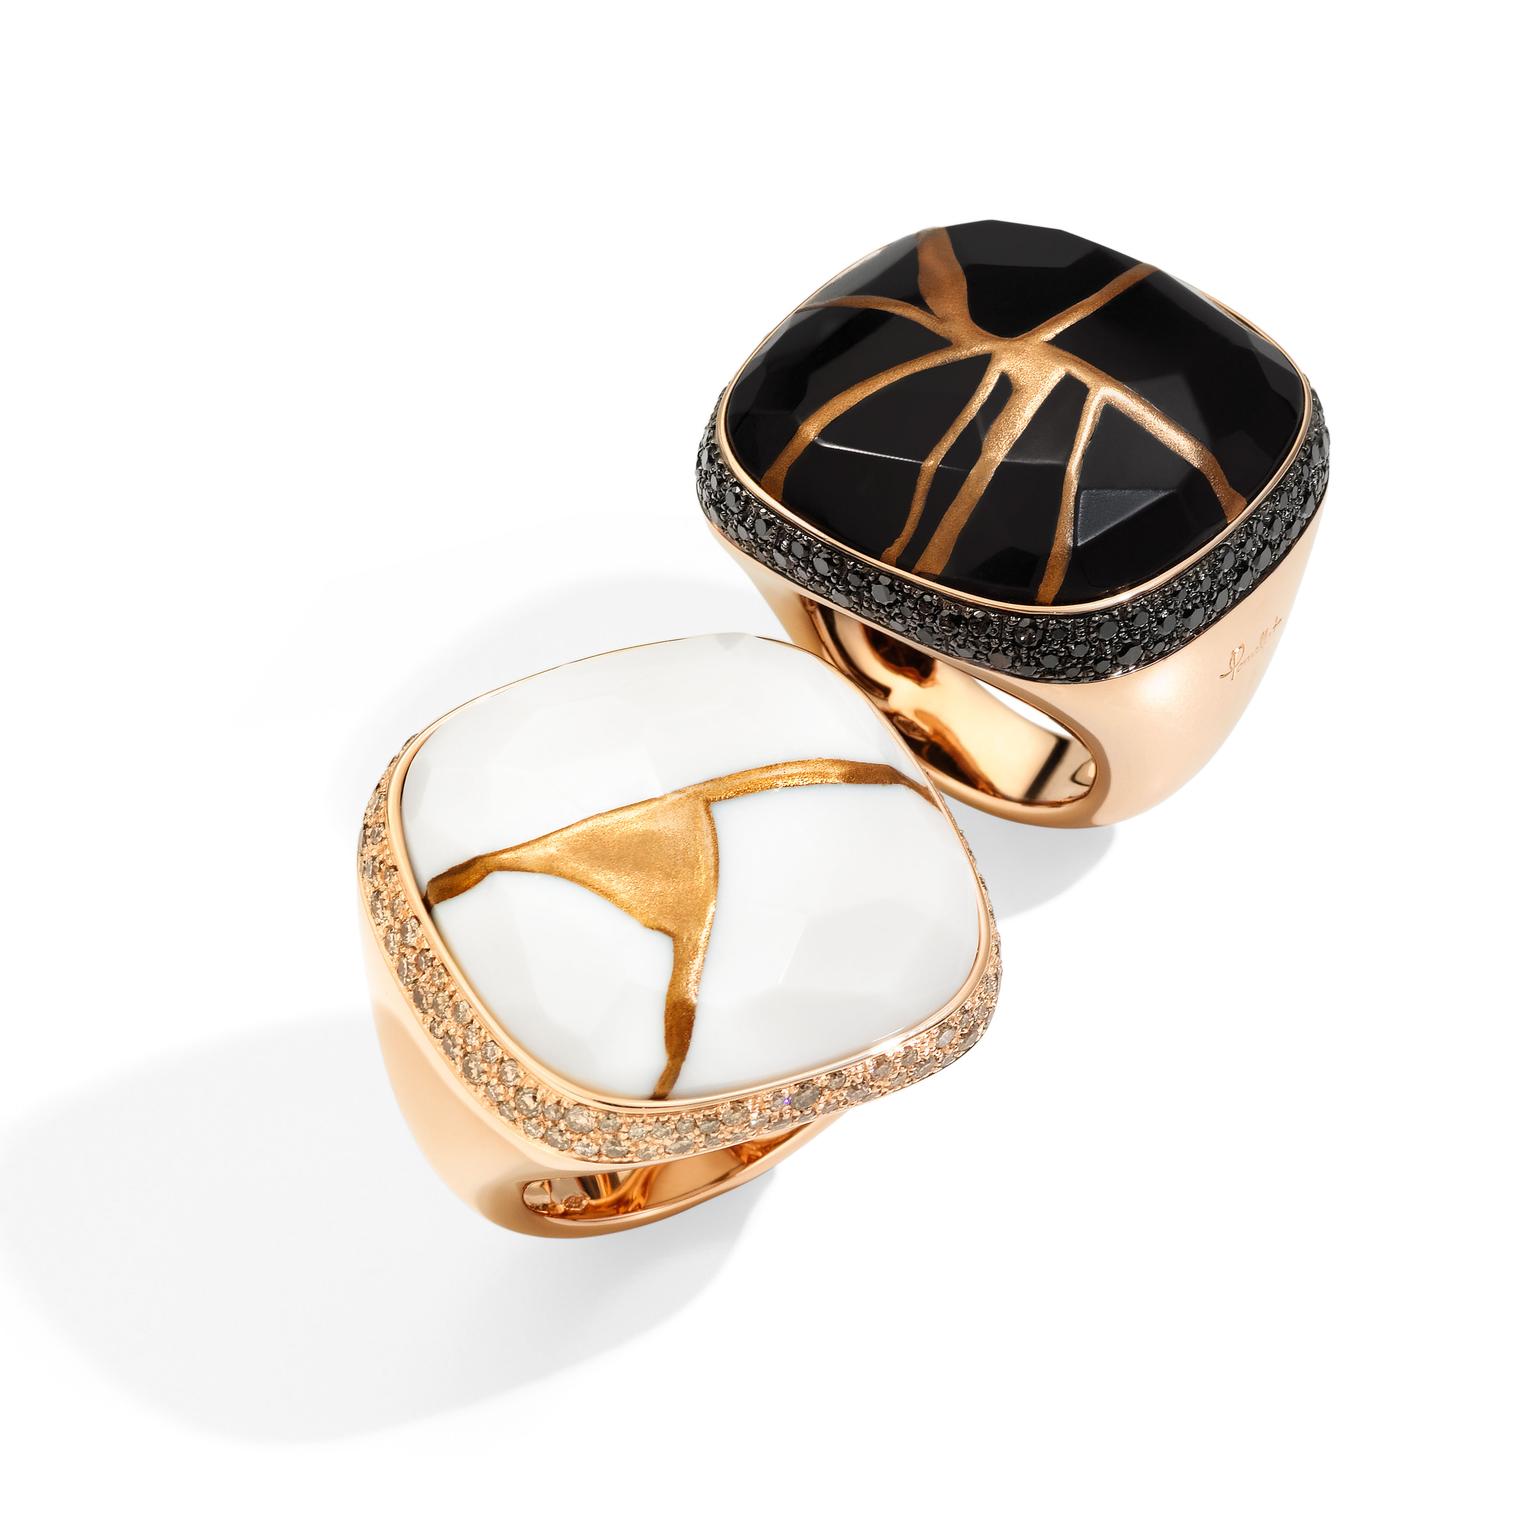 Pomellato Kintsugi Collection rings in rose gold with jet and kogolong